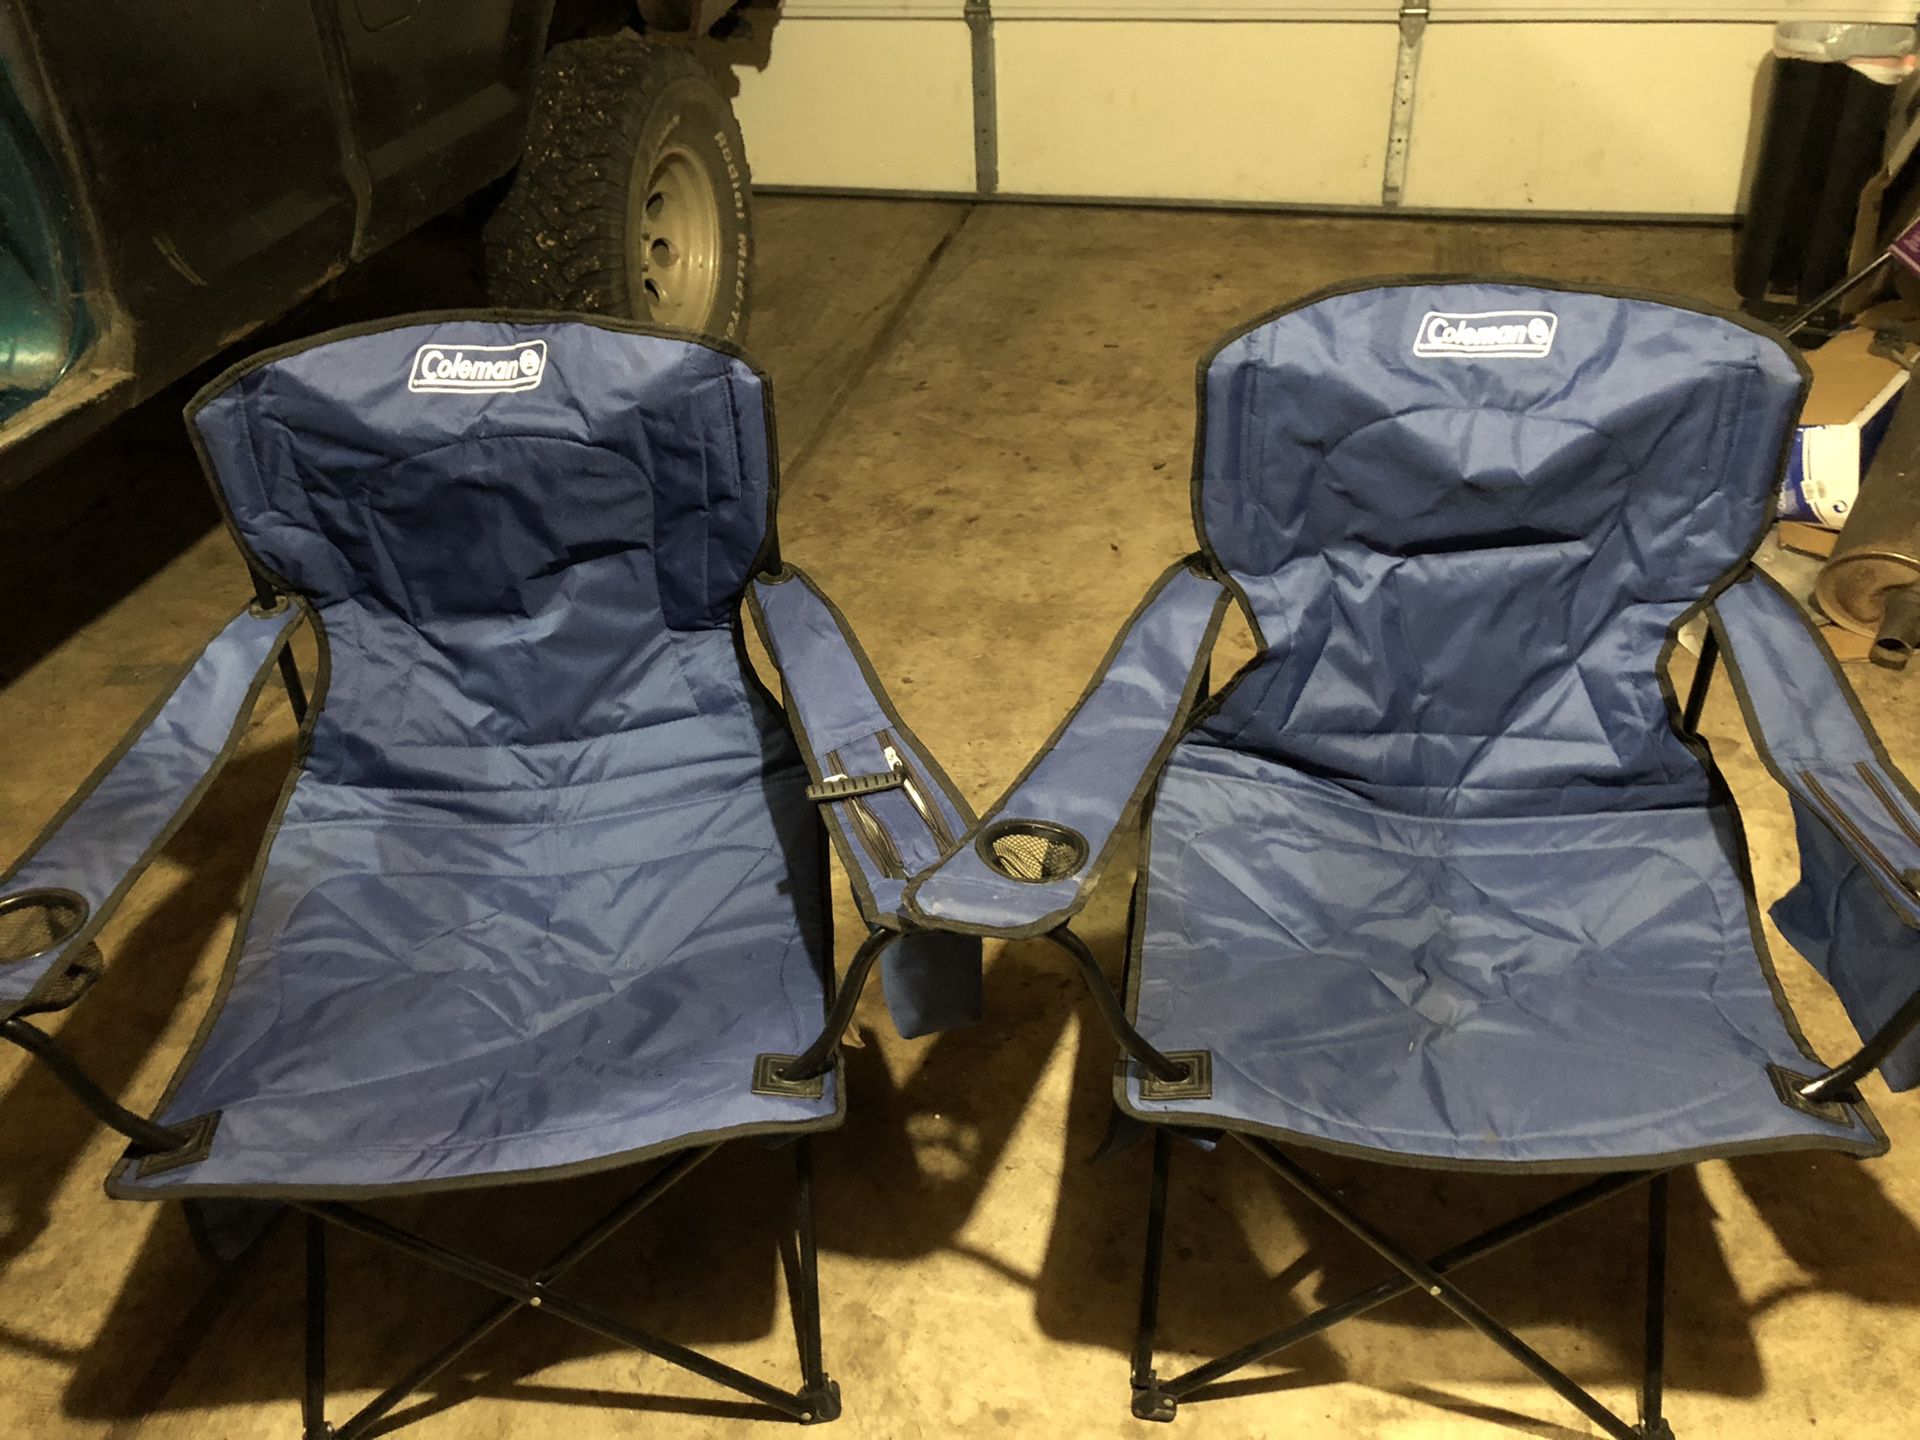 Camp chairs with side coolers